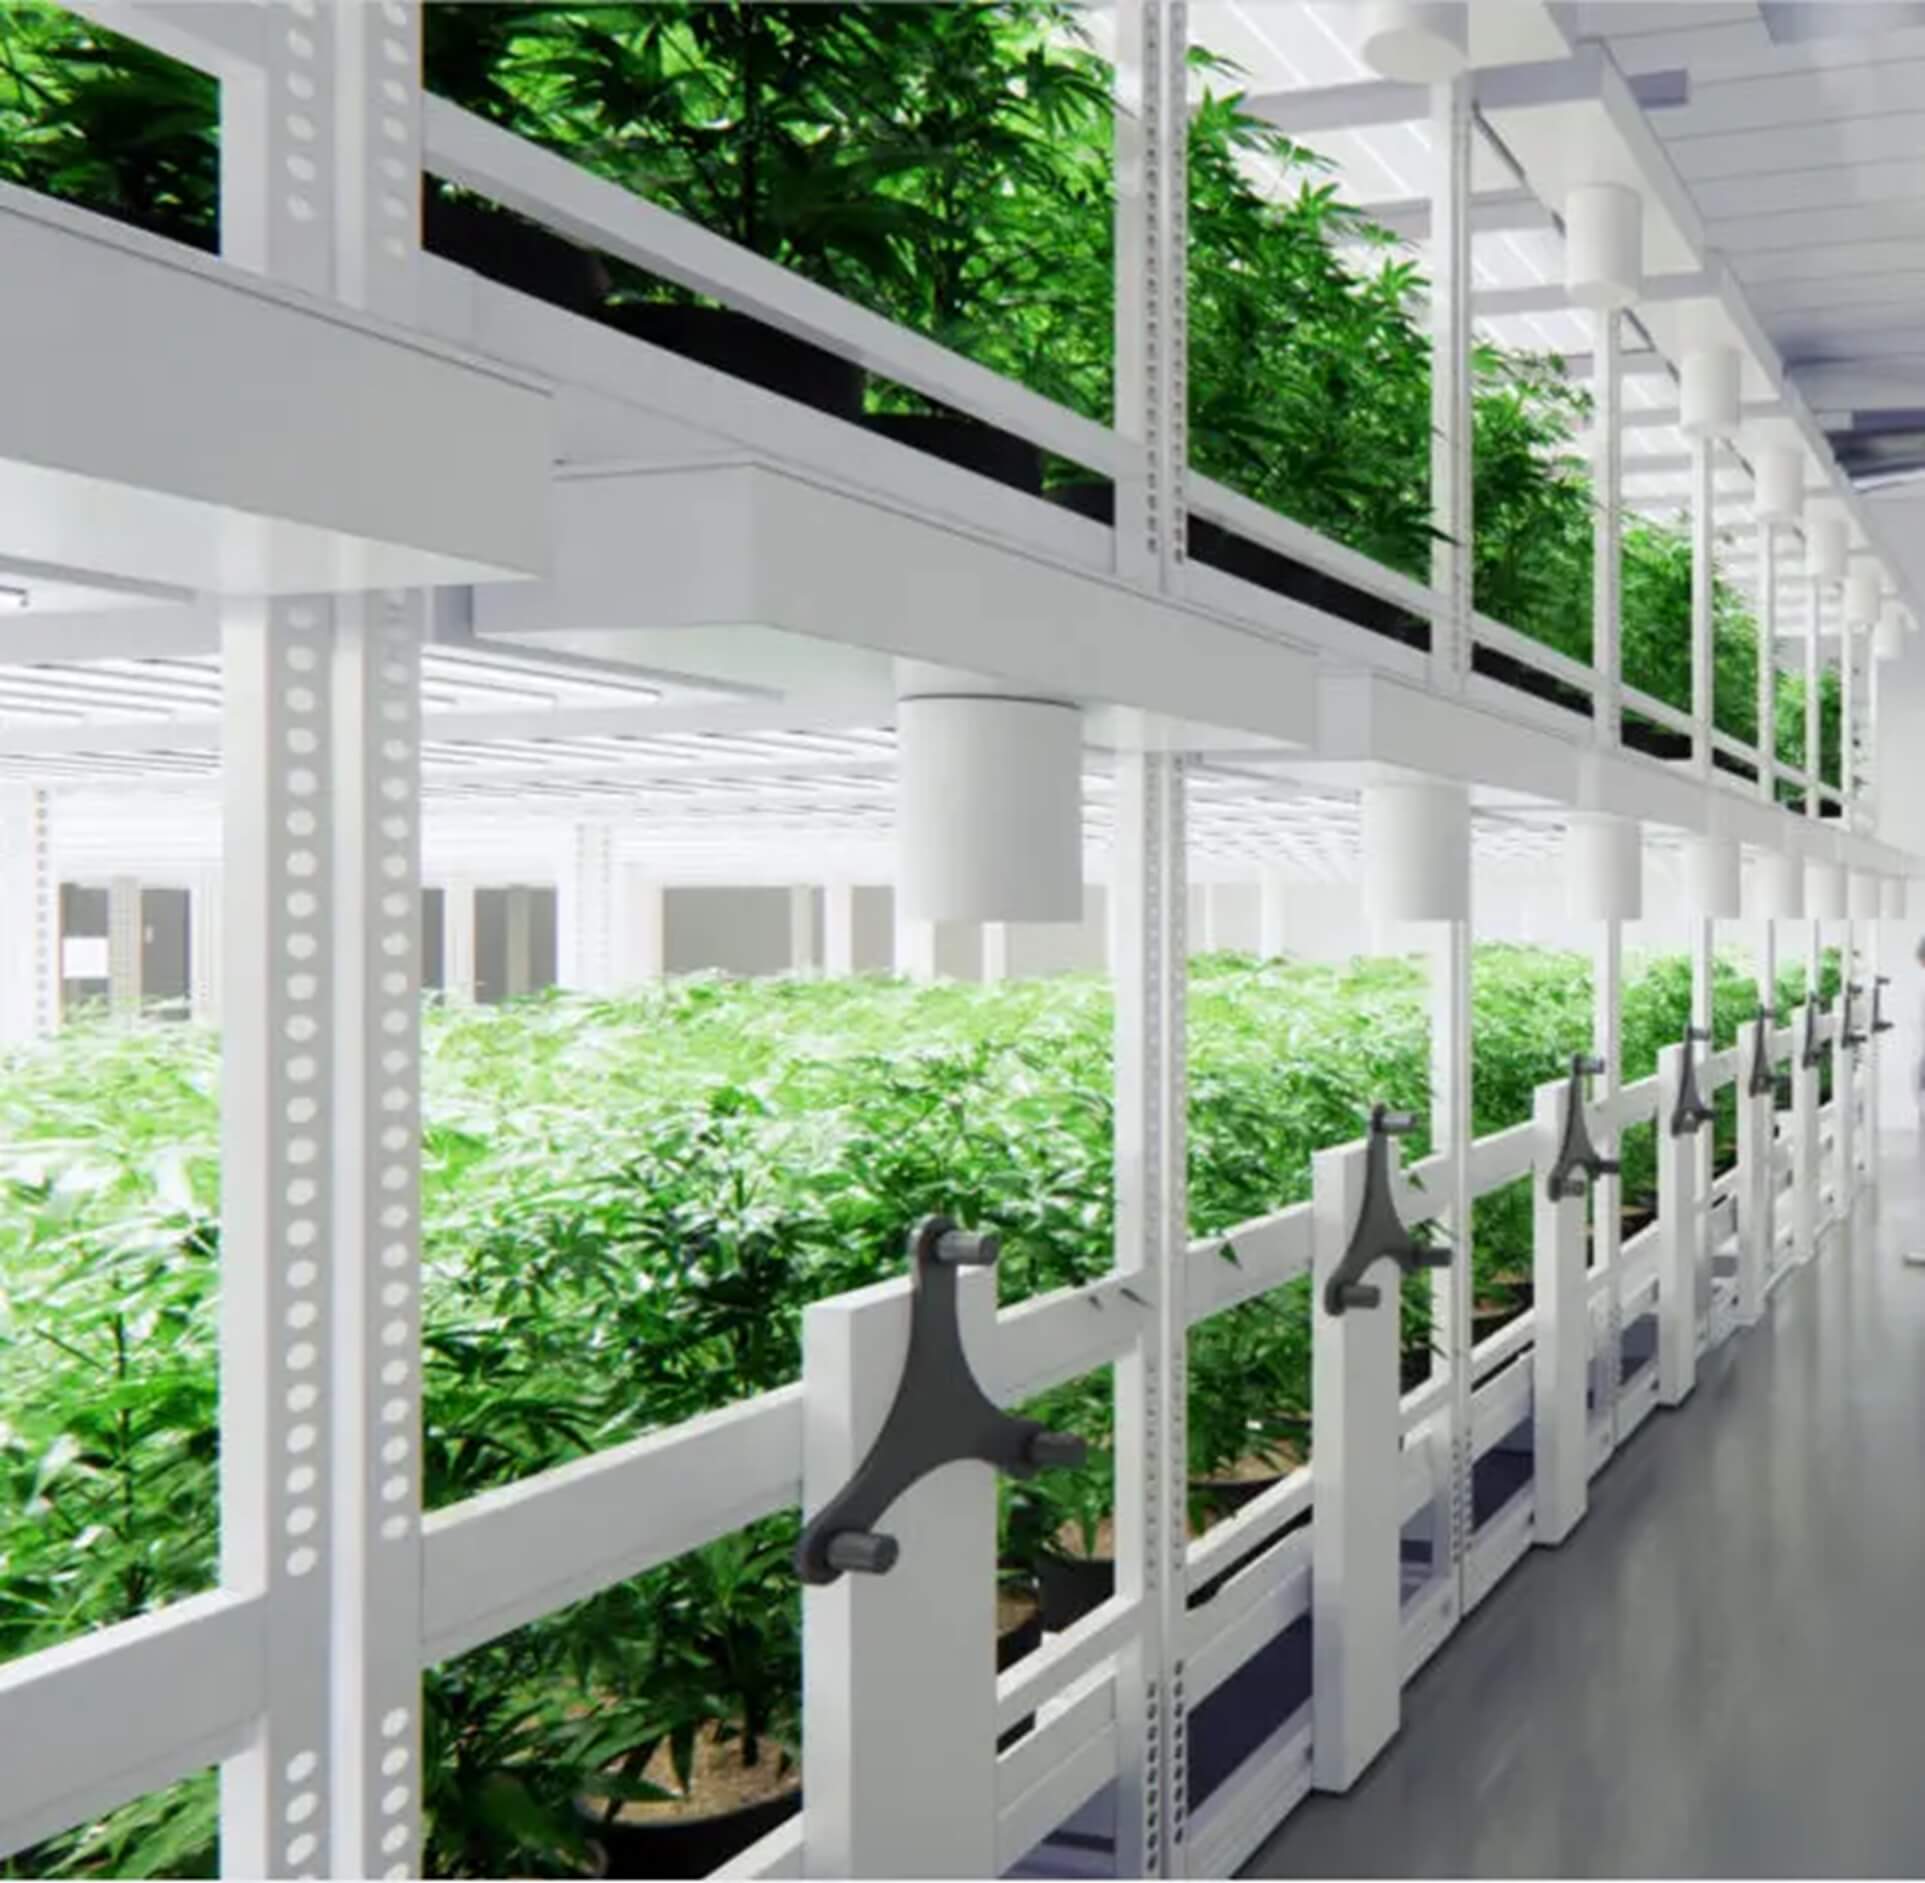  What is profitable to grow on a vertical farm?